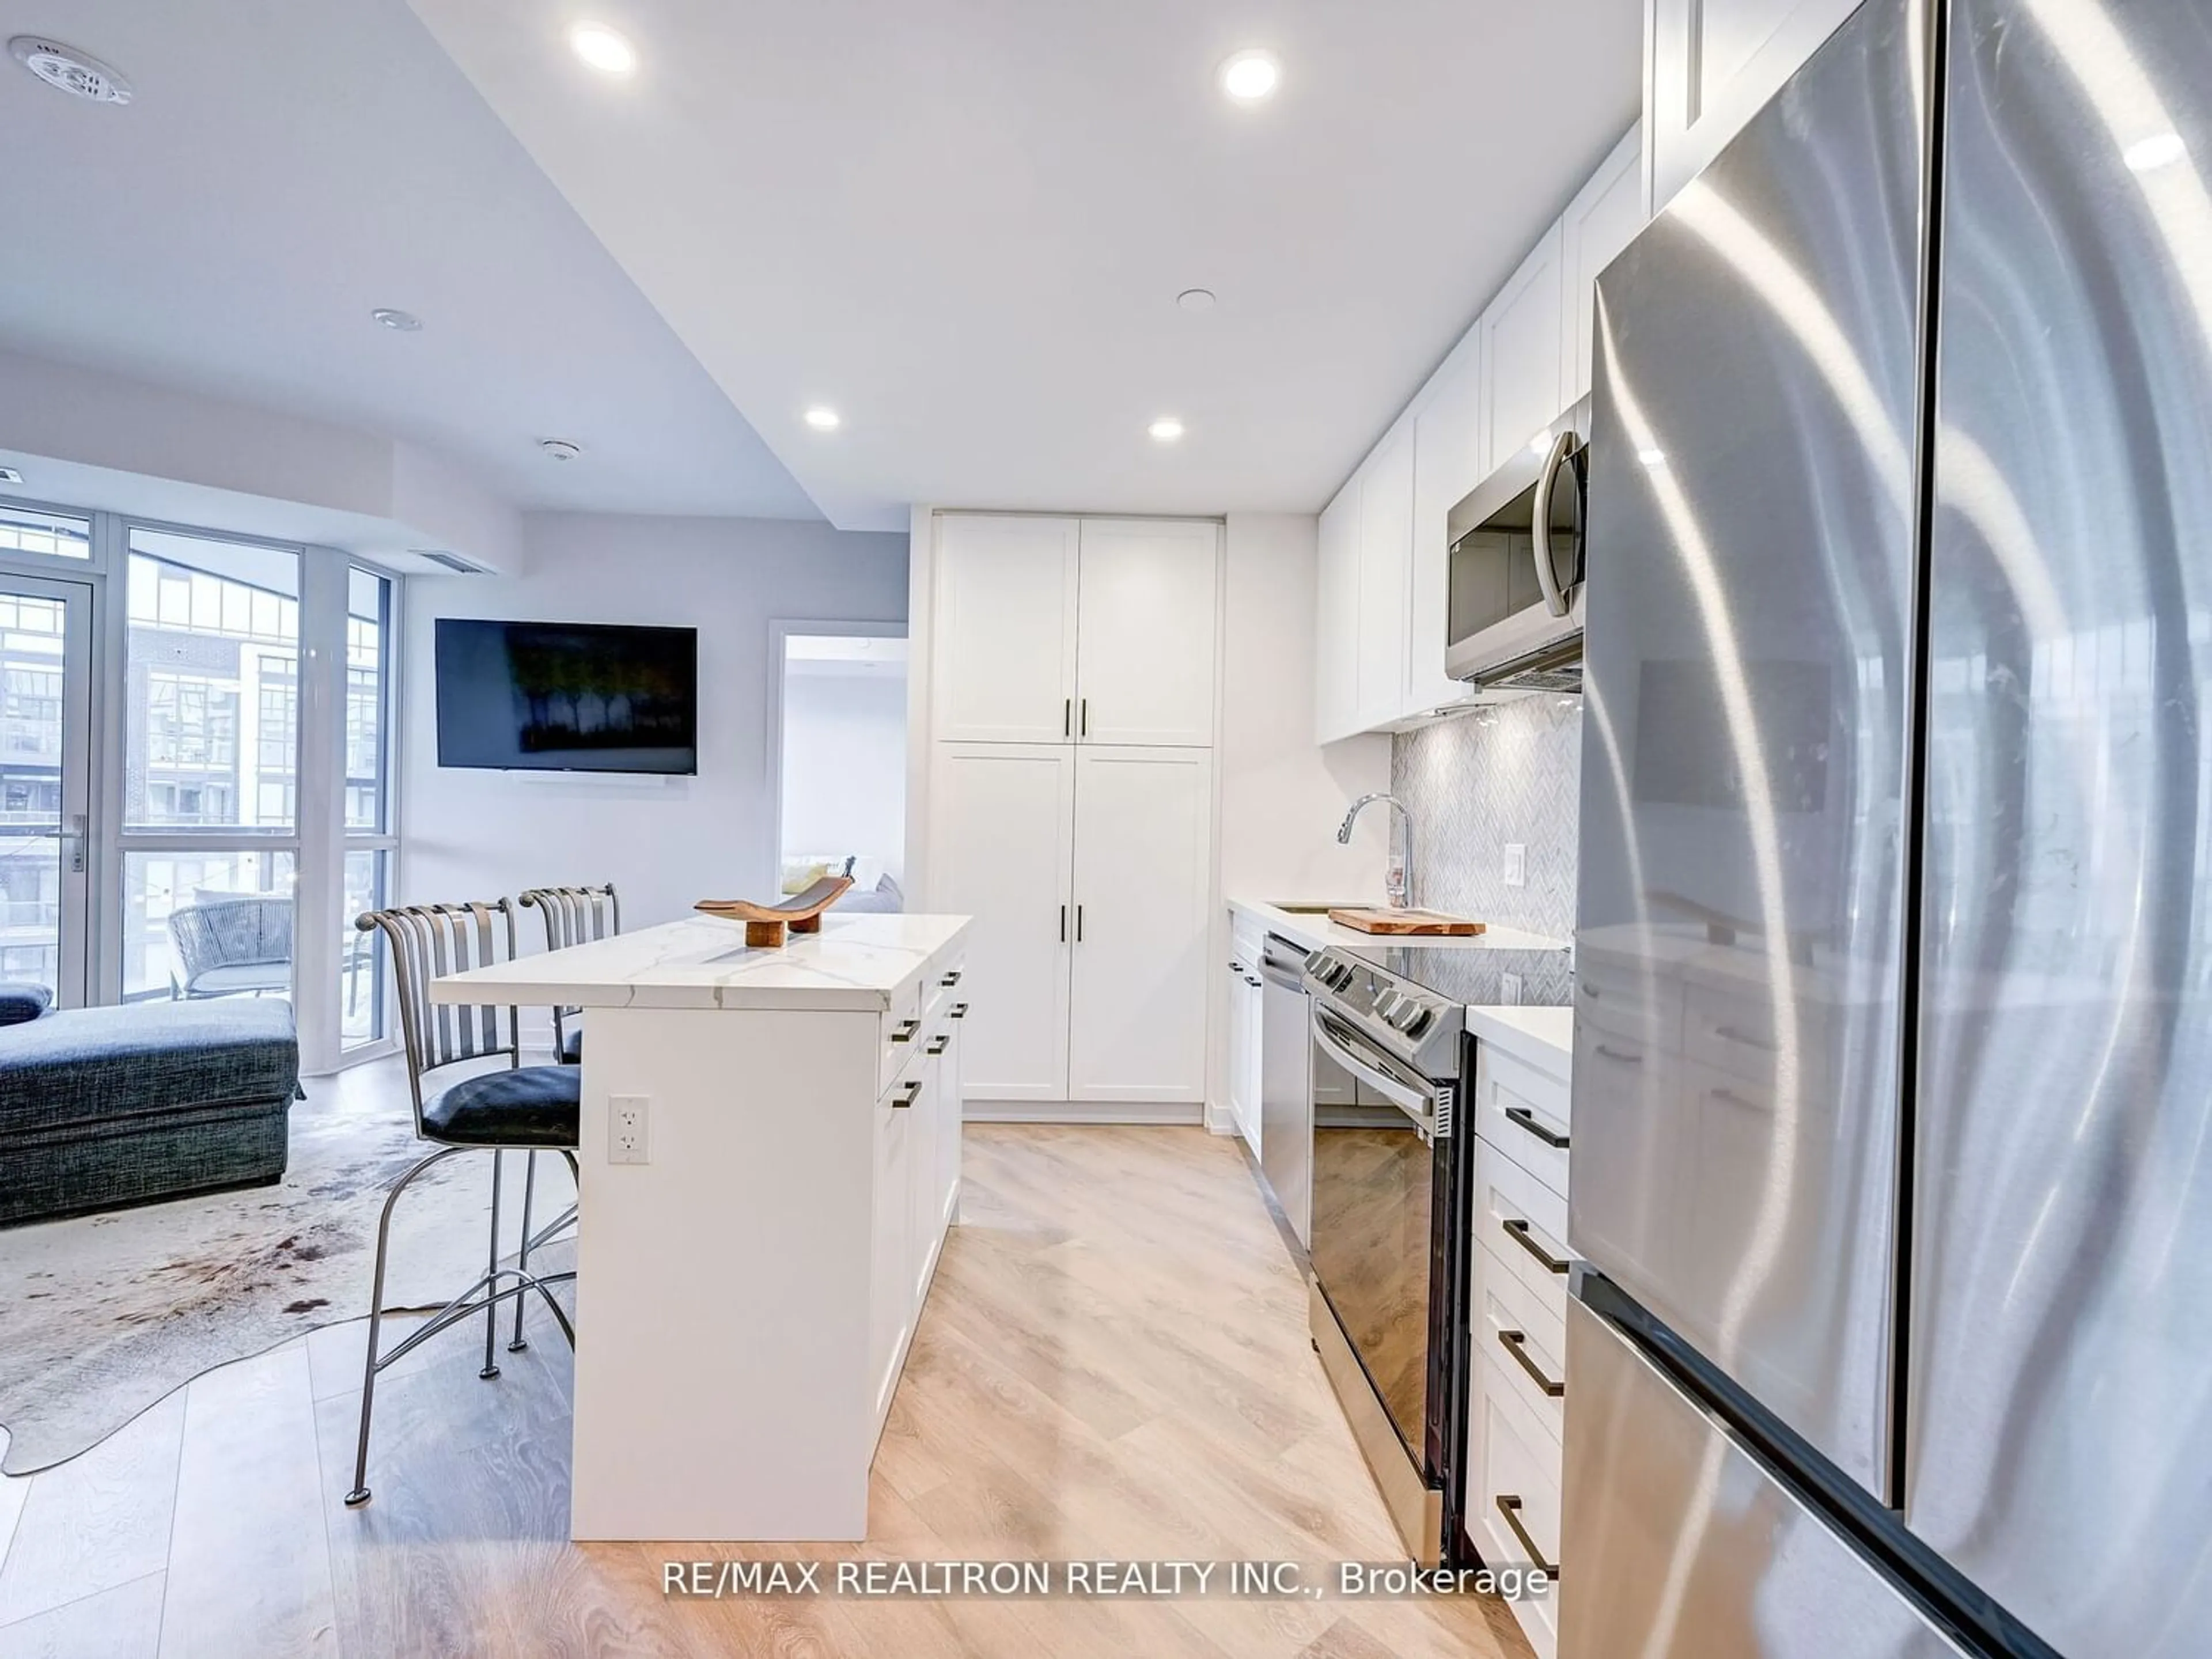 Contemporary kitchen for 415 Sea Ray Ave #327, Innisfil Ontario L9S 0R5